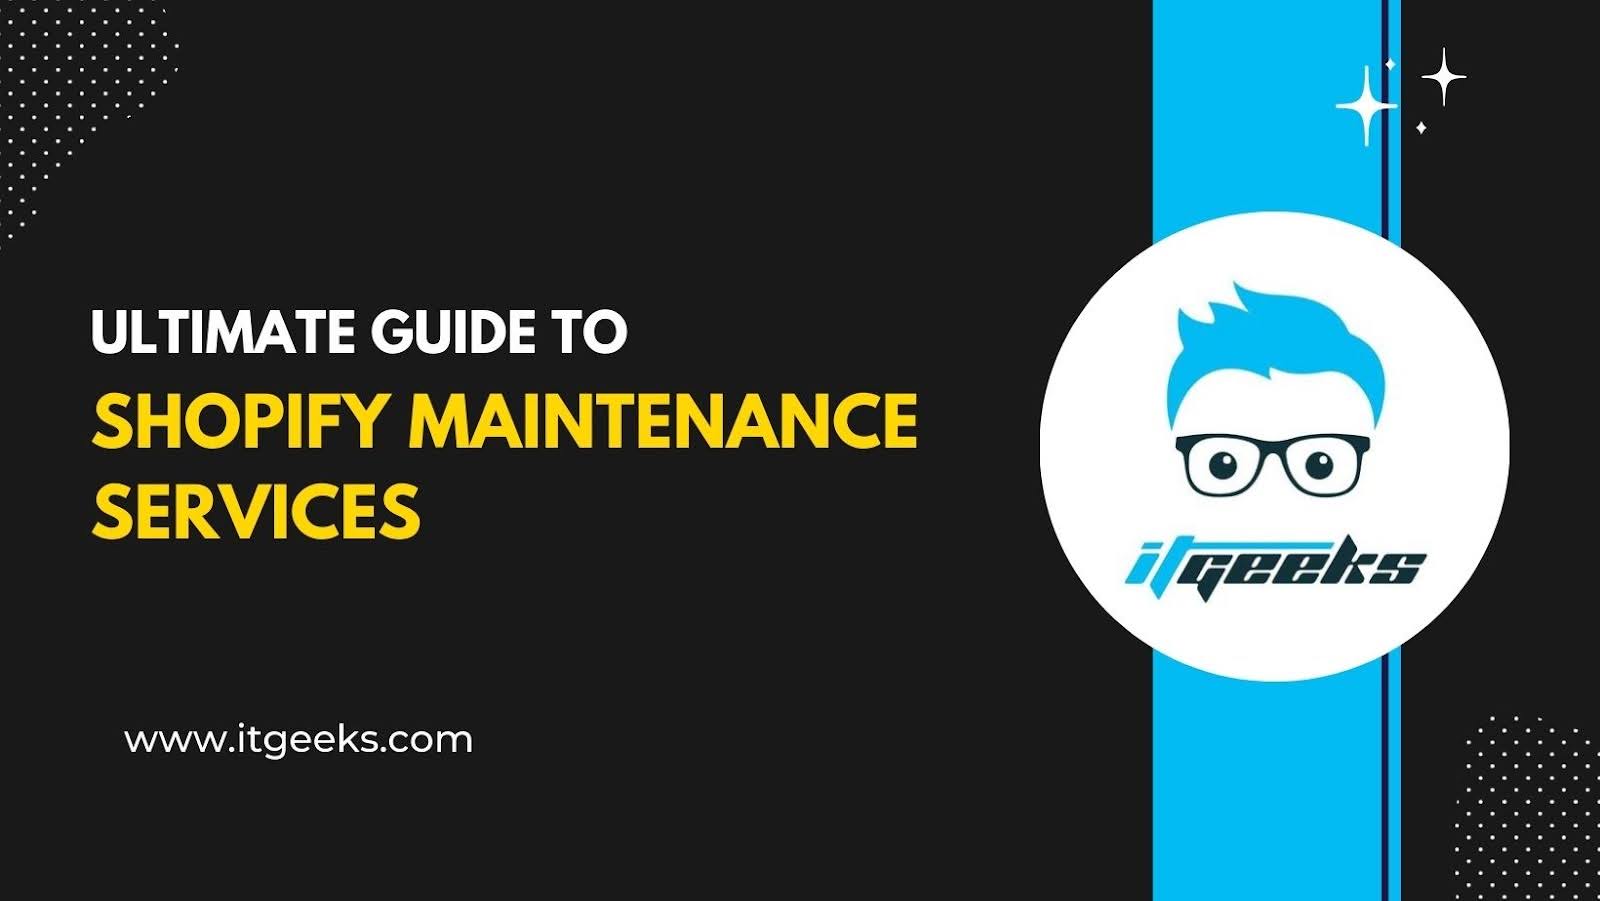 Ultimate Guide to Shopify Maintenance Services